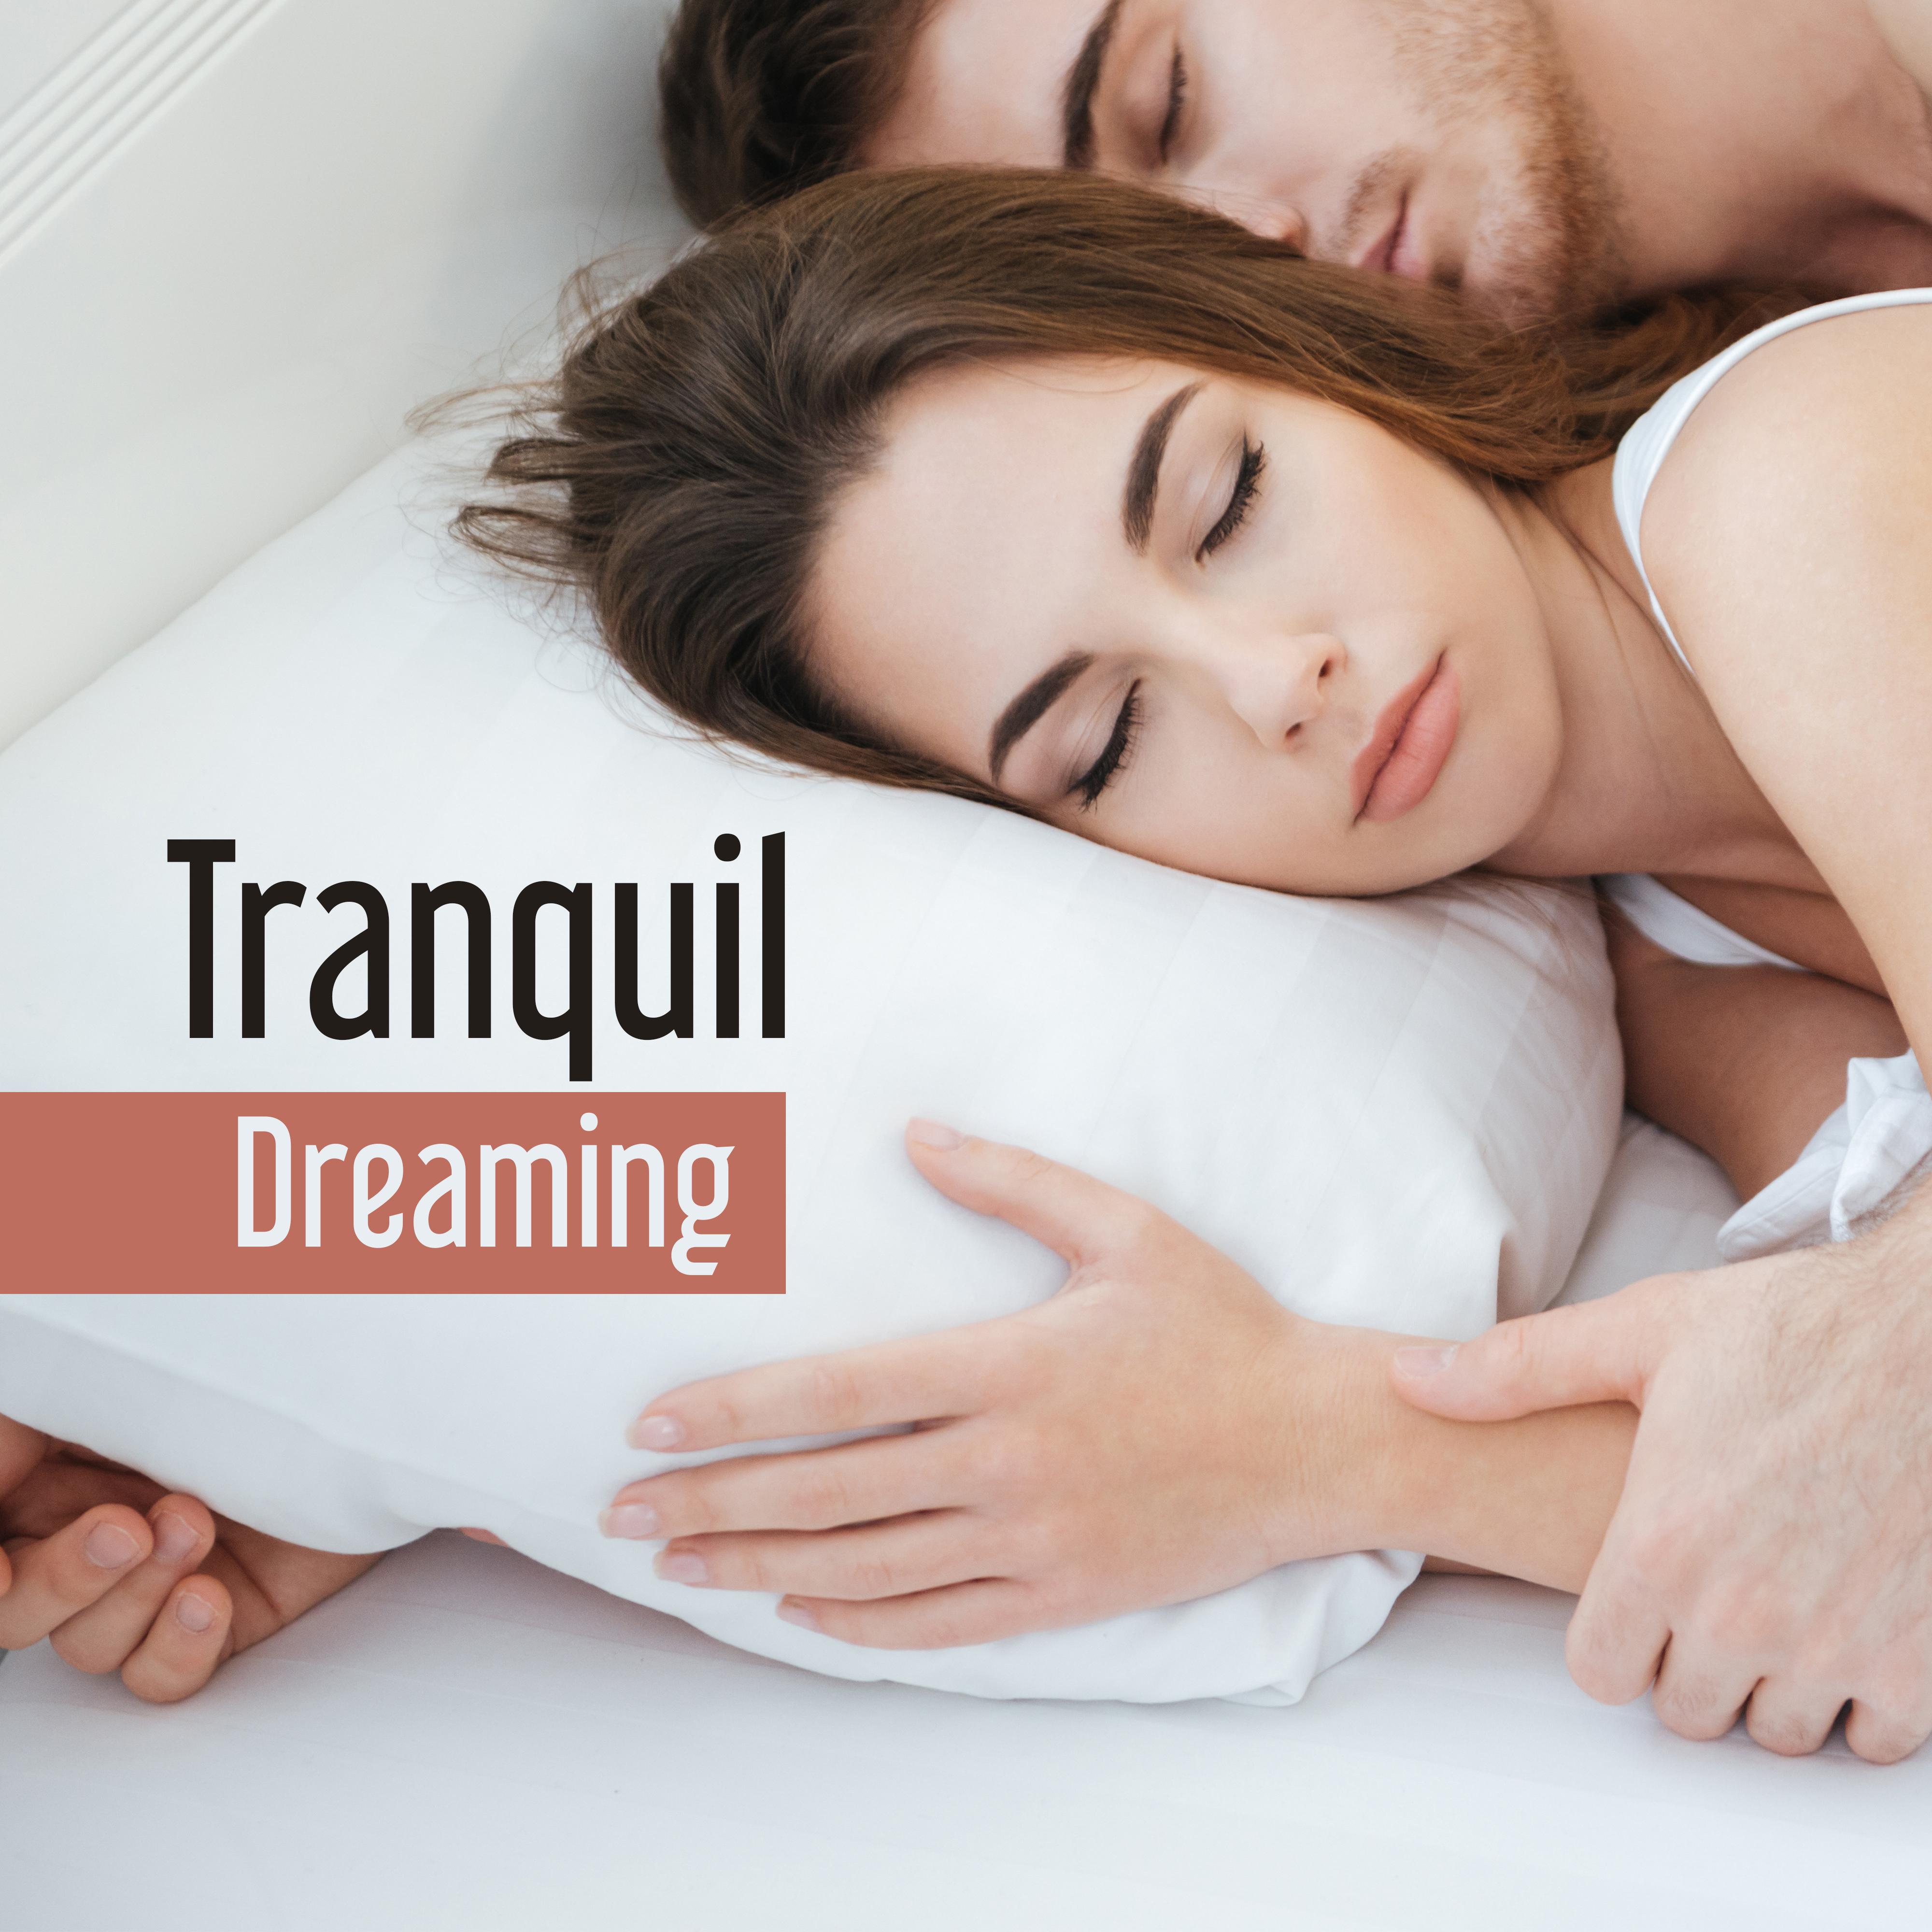 Tranquil Dreaming – Soft Songs for Sleep, Relaxation, Deep Relief, Night Chill, Quiet Nap, Healing Lullabies, Sweet Dreams